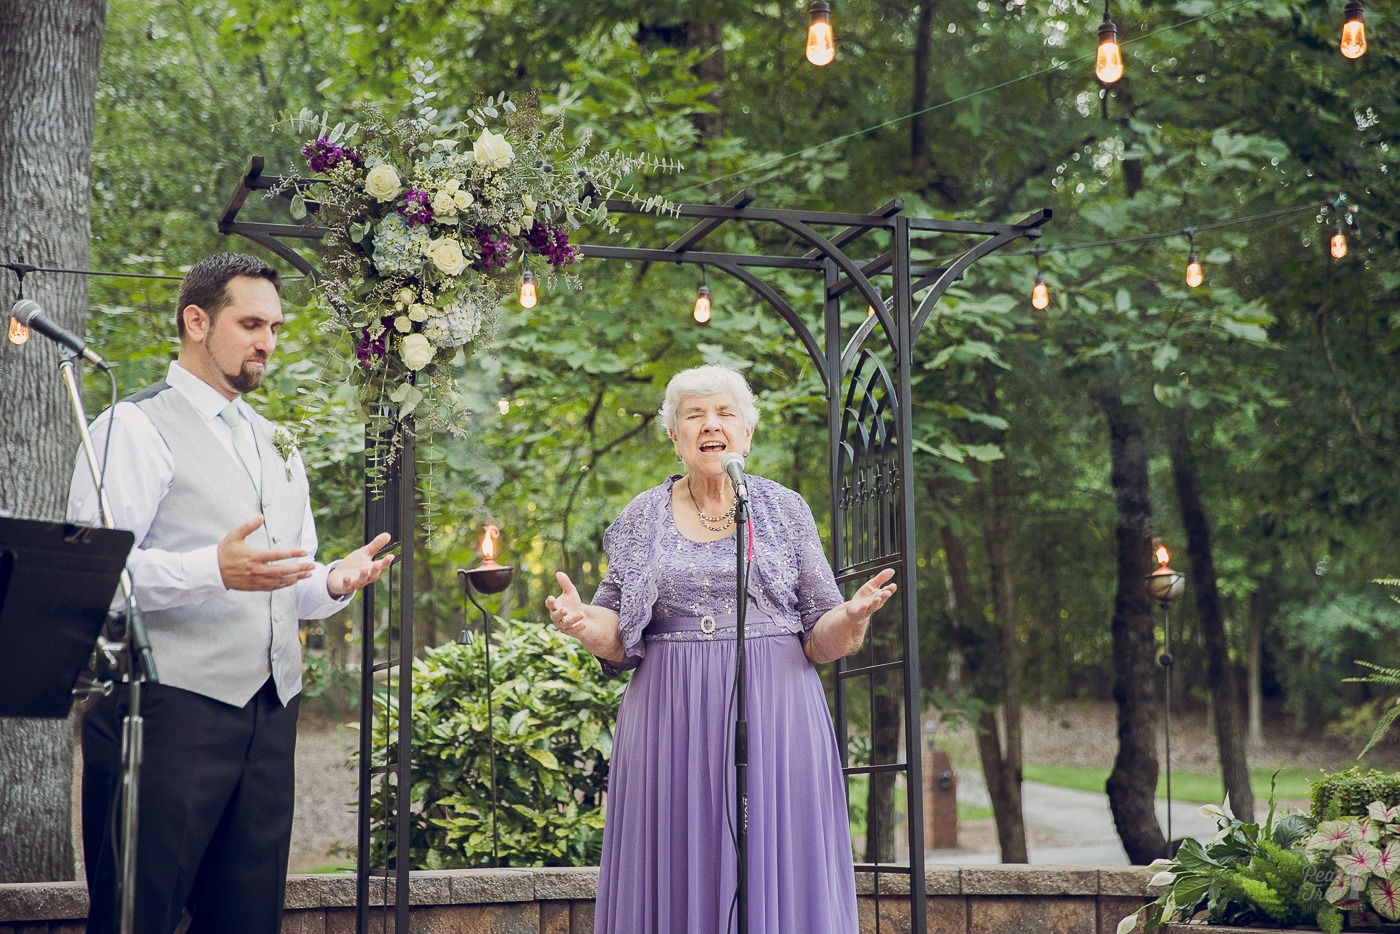 Grandmother praying with hands outstretched at start of a wedding ceremony surrounded by green foliage and hanging lights